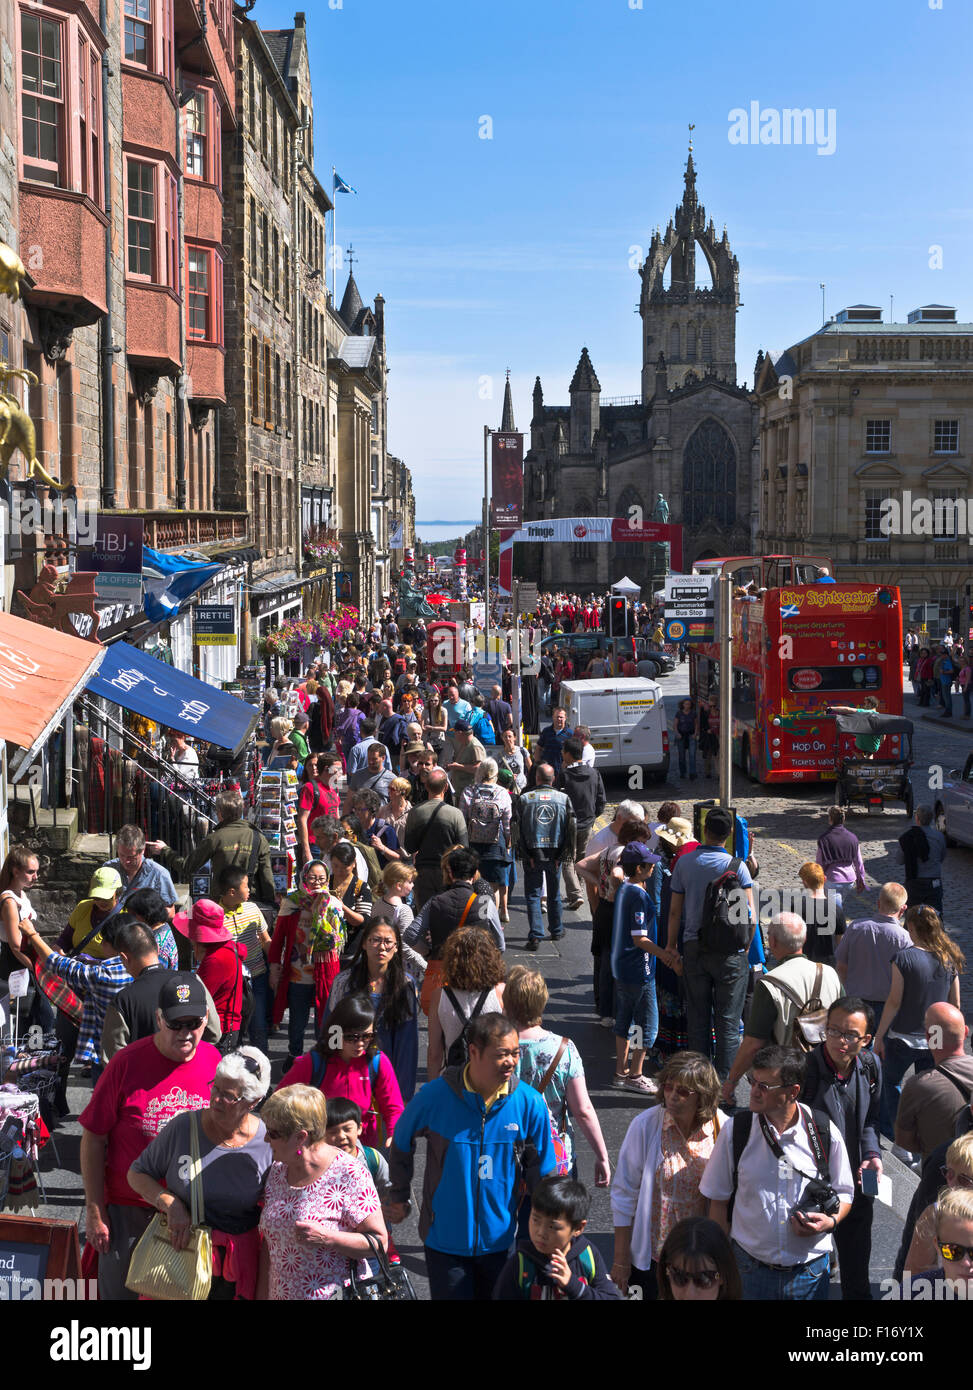 dh Lawnmarket THE ROYAL MILE EDINBURGH affollate Street tourists scotland view people affolled Summer city center Foto Stock